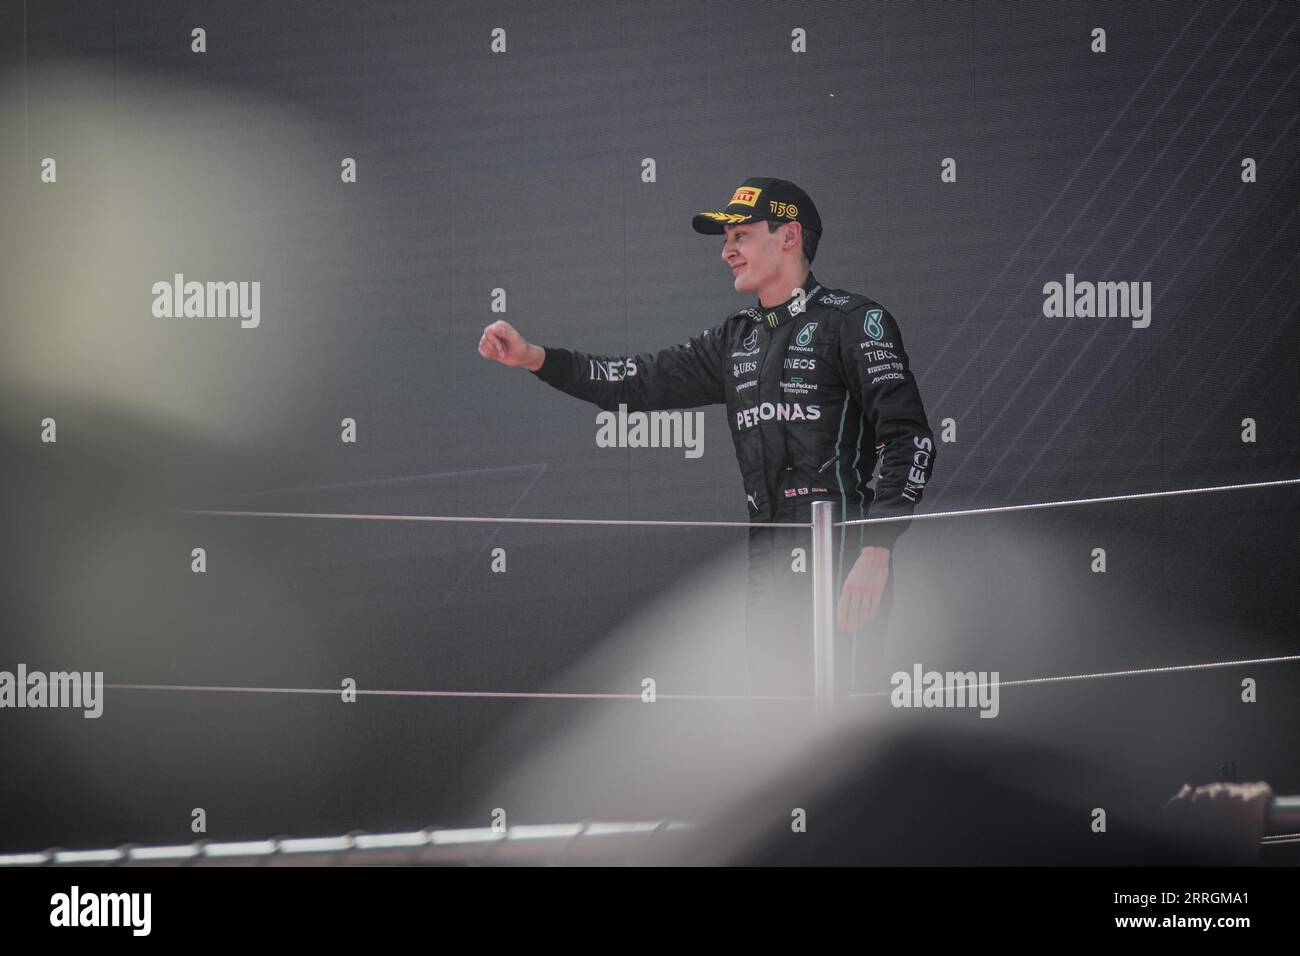 George Russell stands at the podium, reveling in his third-place finish at the Spanish Grand Prix. Stock Photo